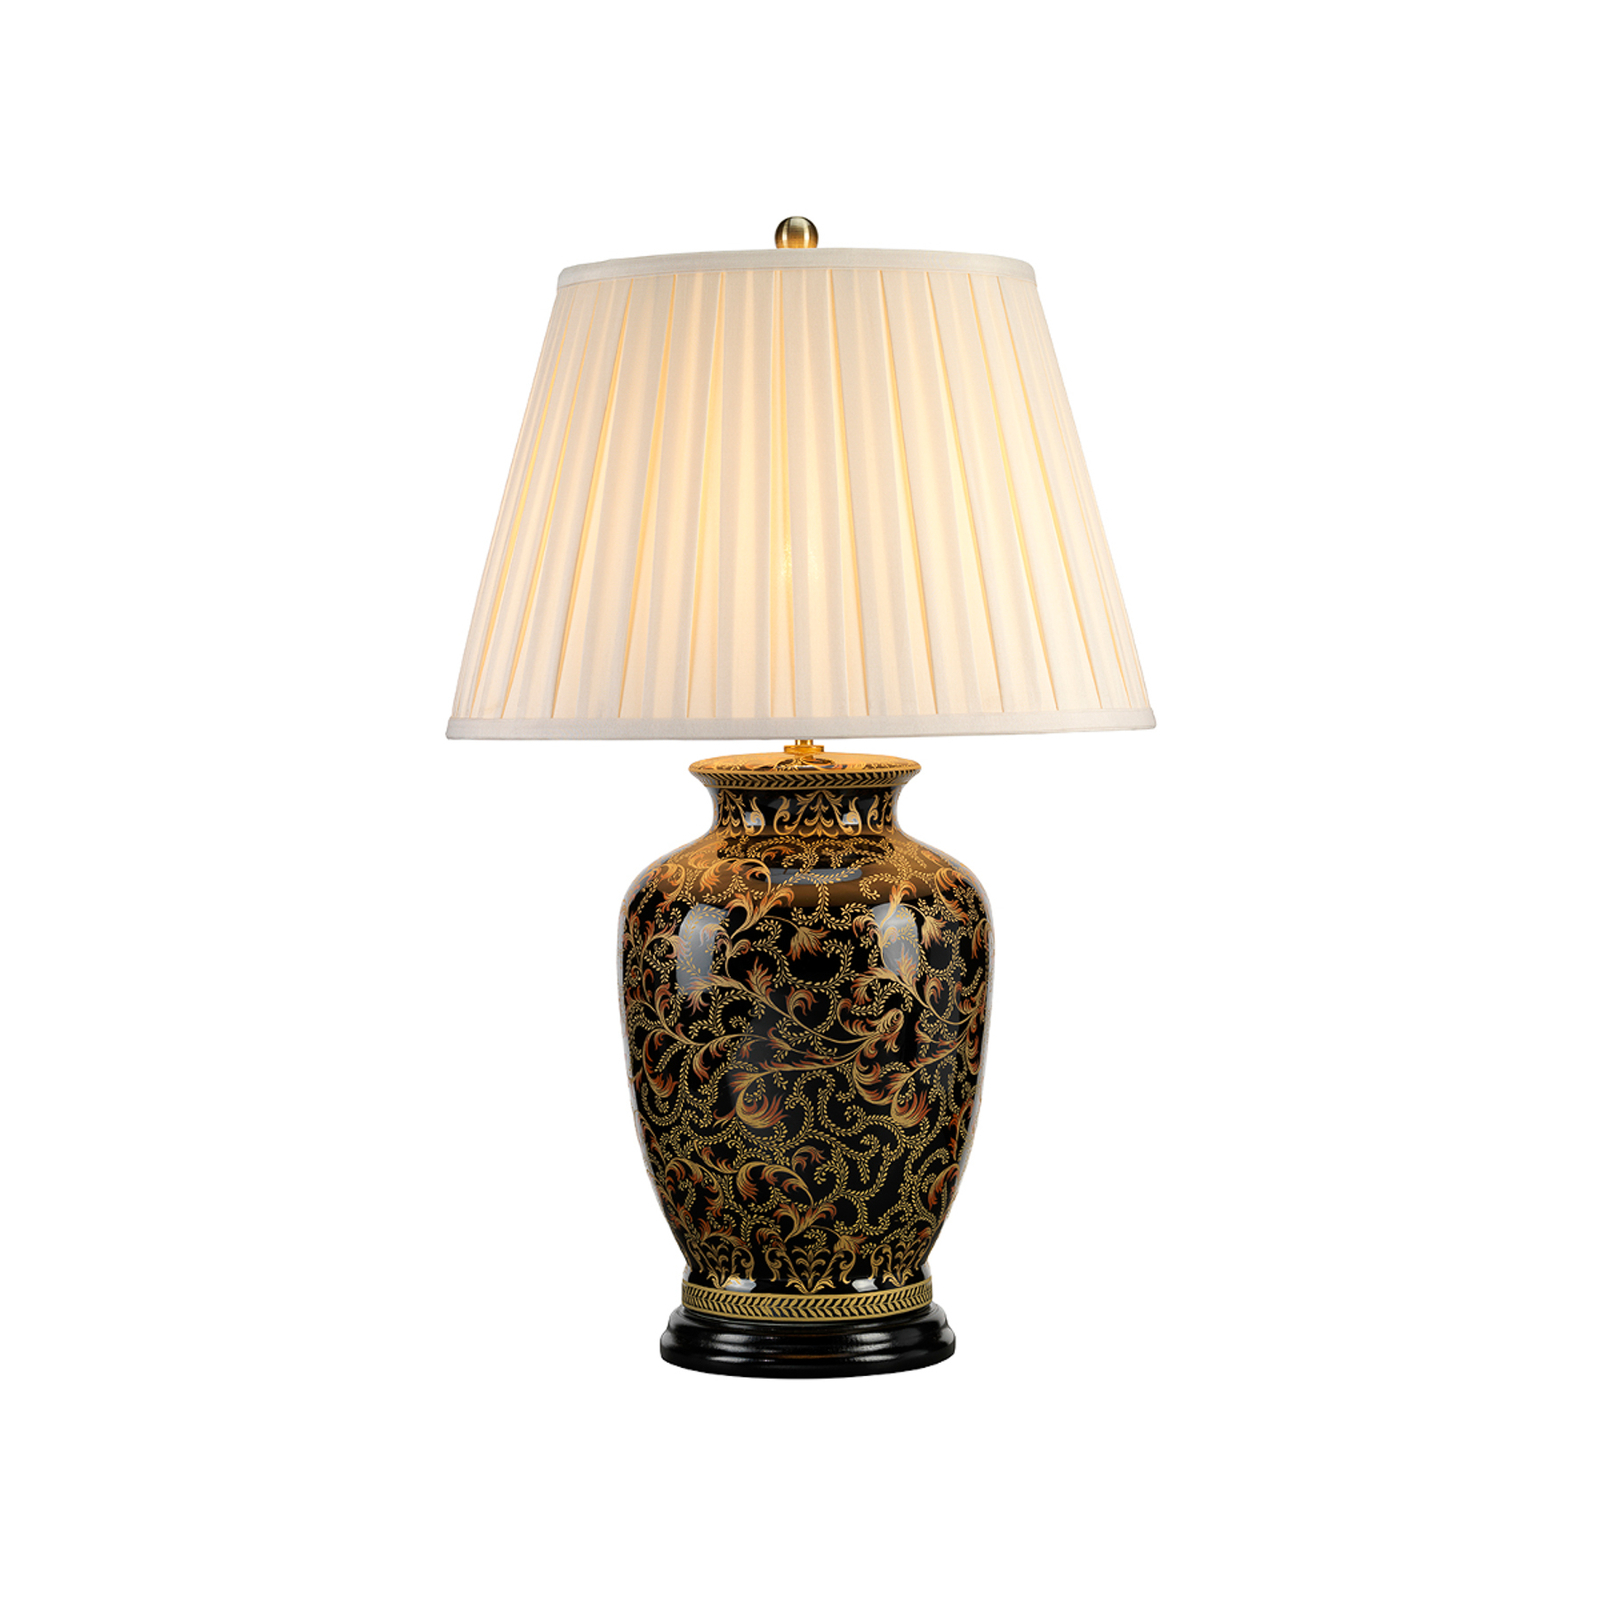 Morris table lamp with porcelain base